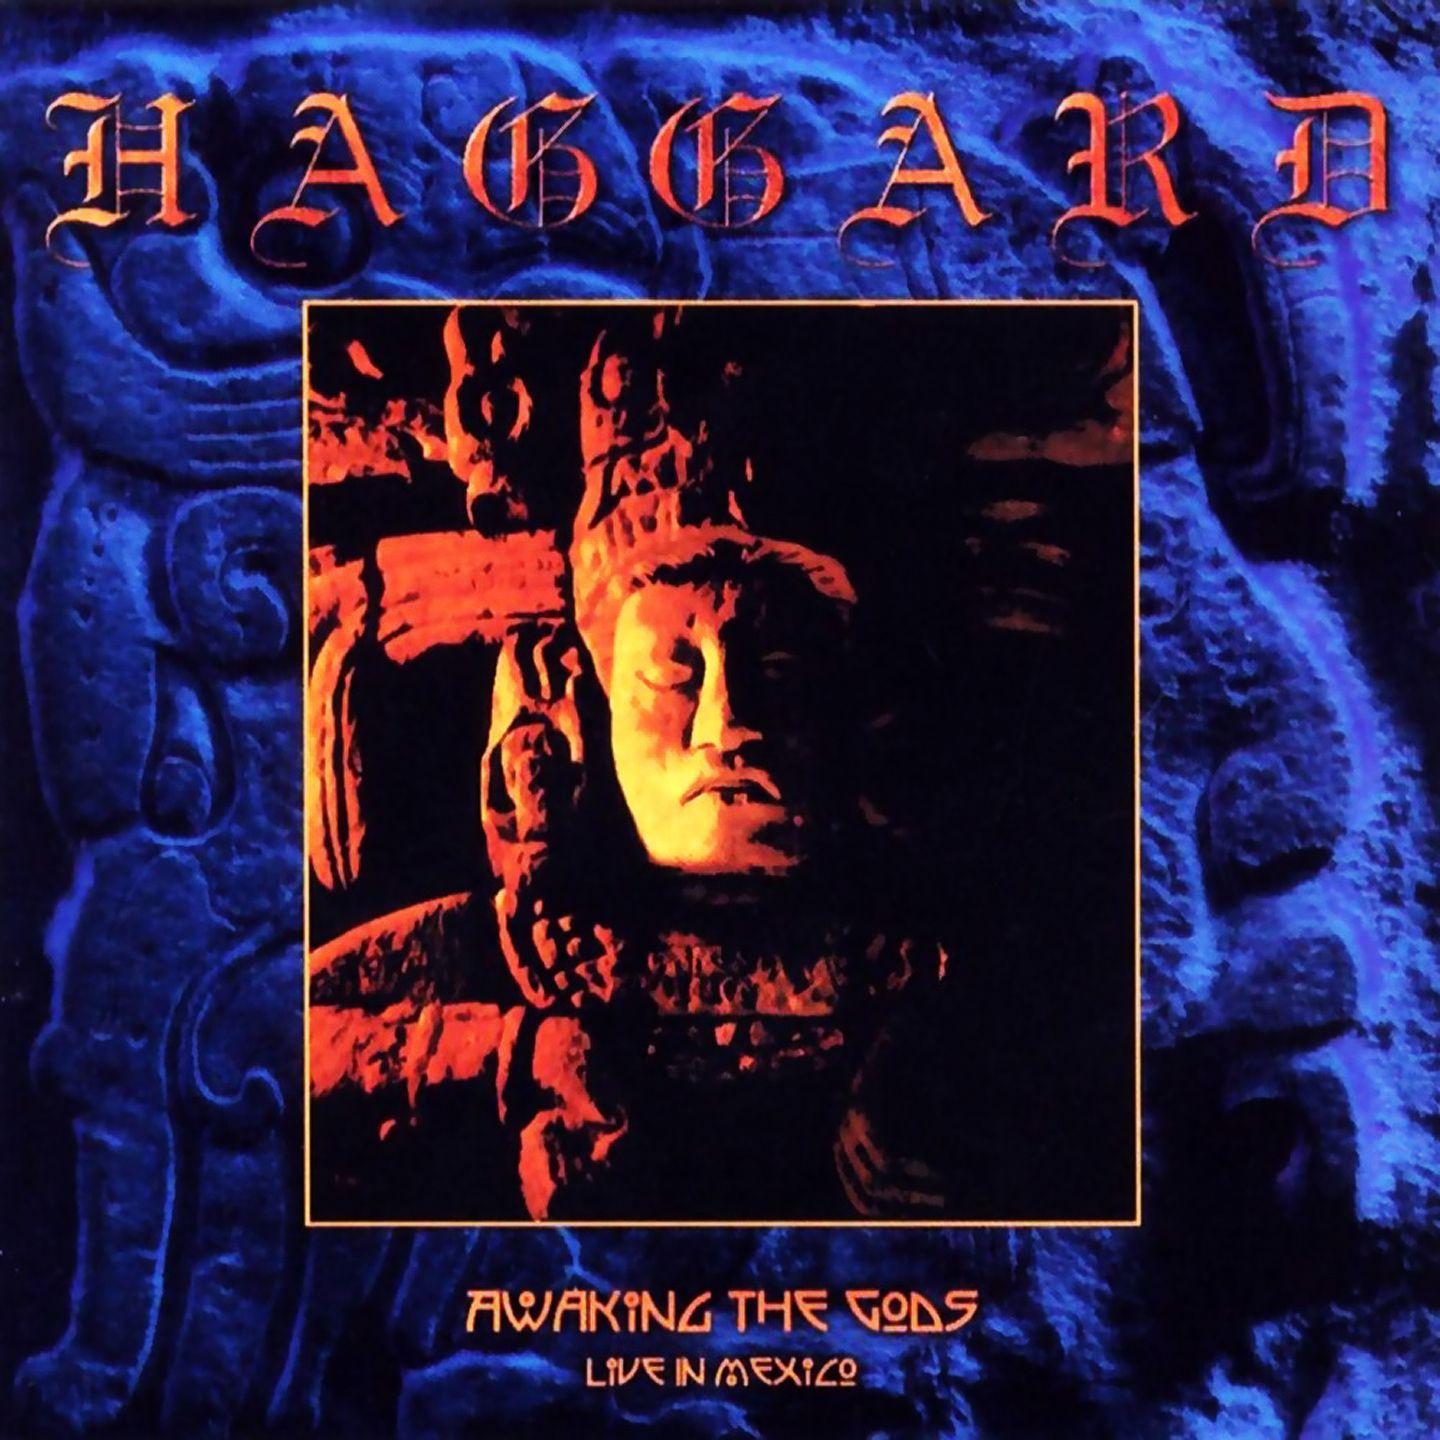 Haggard - In a Fullmoon Procession